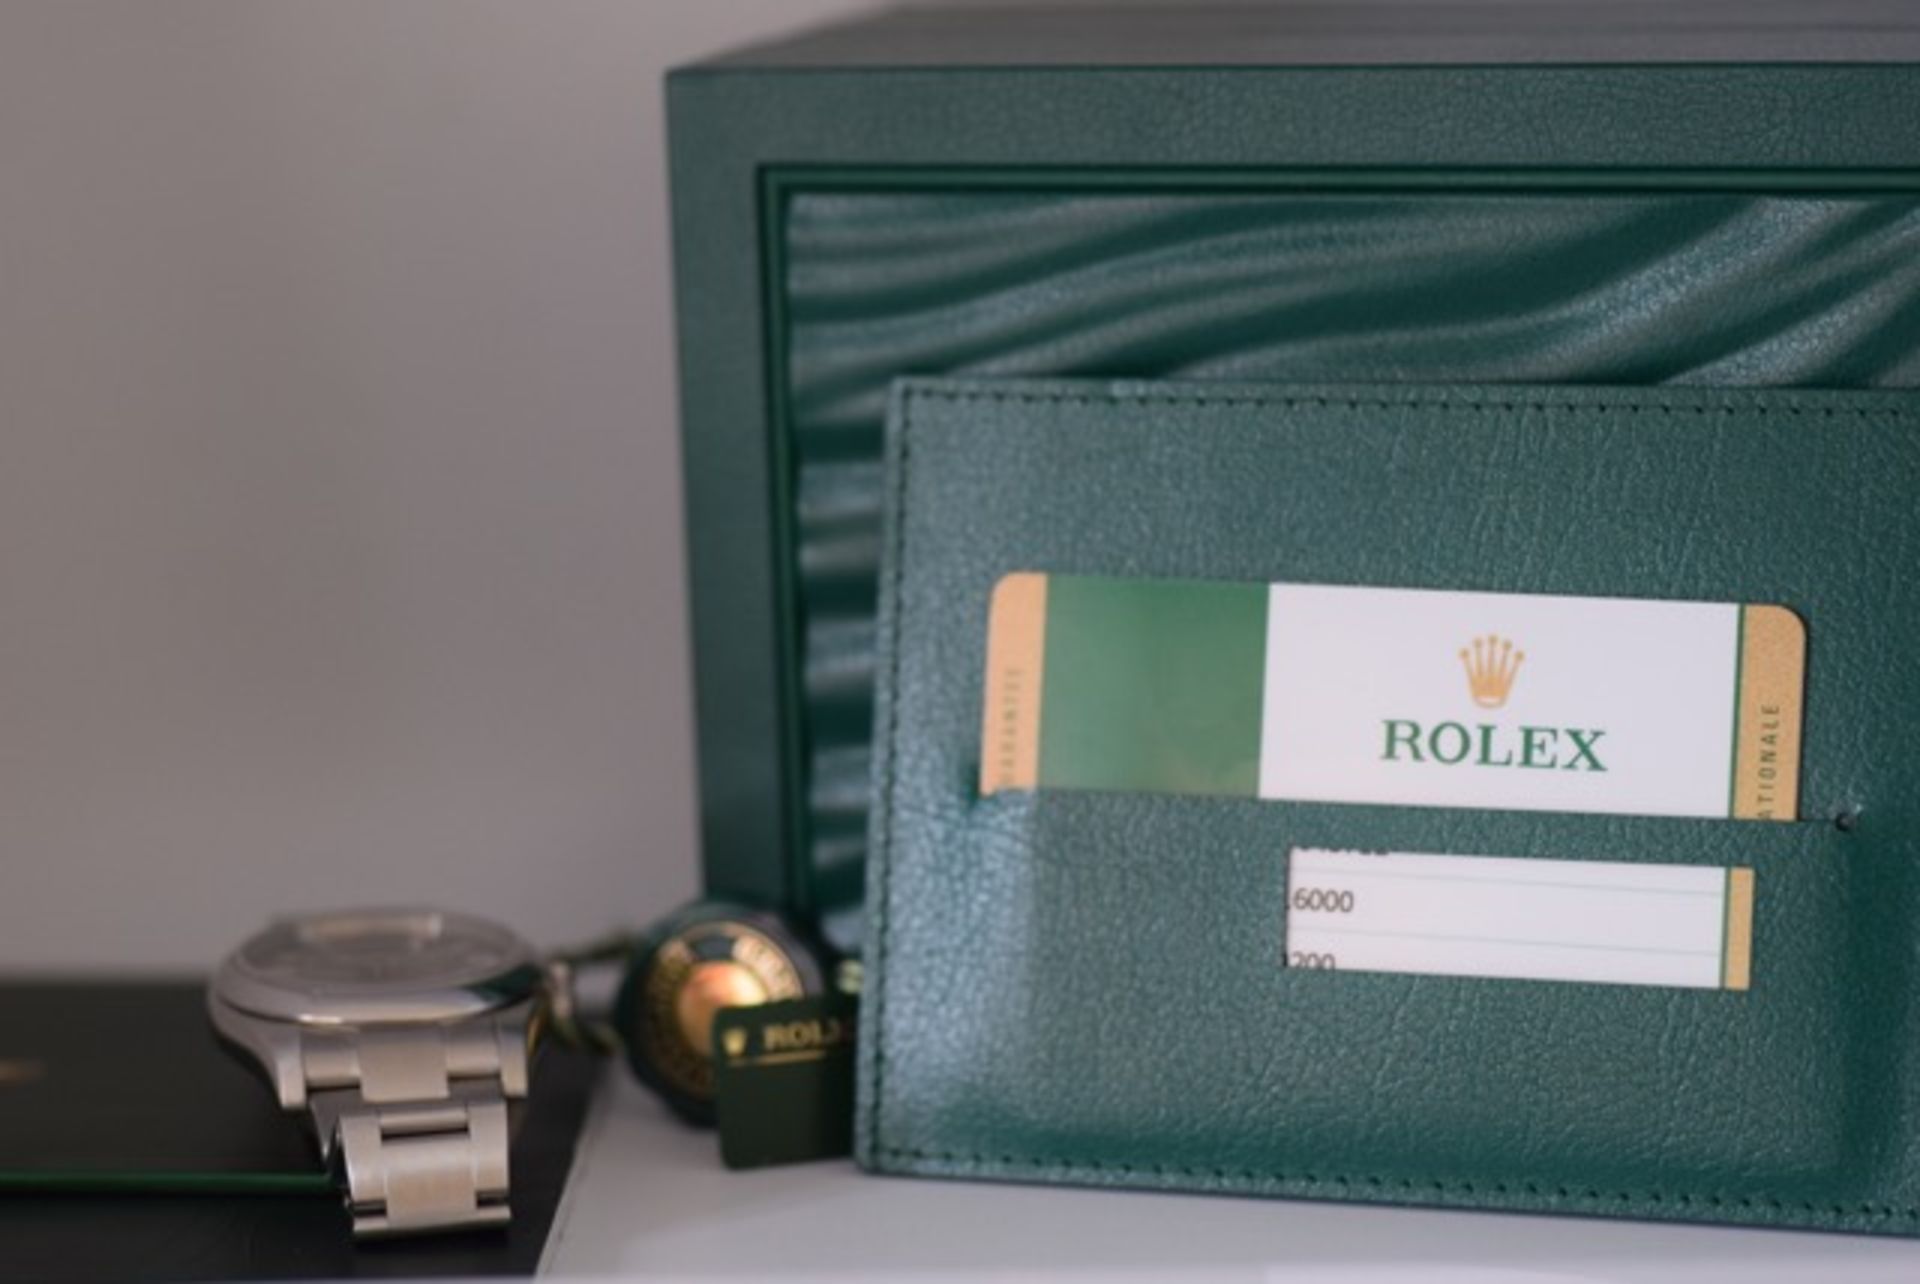 ROLEX OYSTER 116000 WATCH - Image 5 of 8